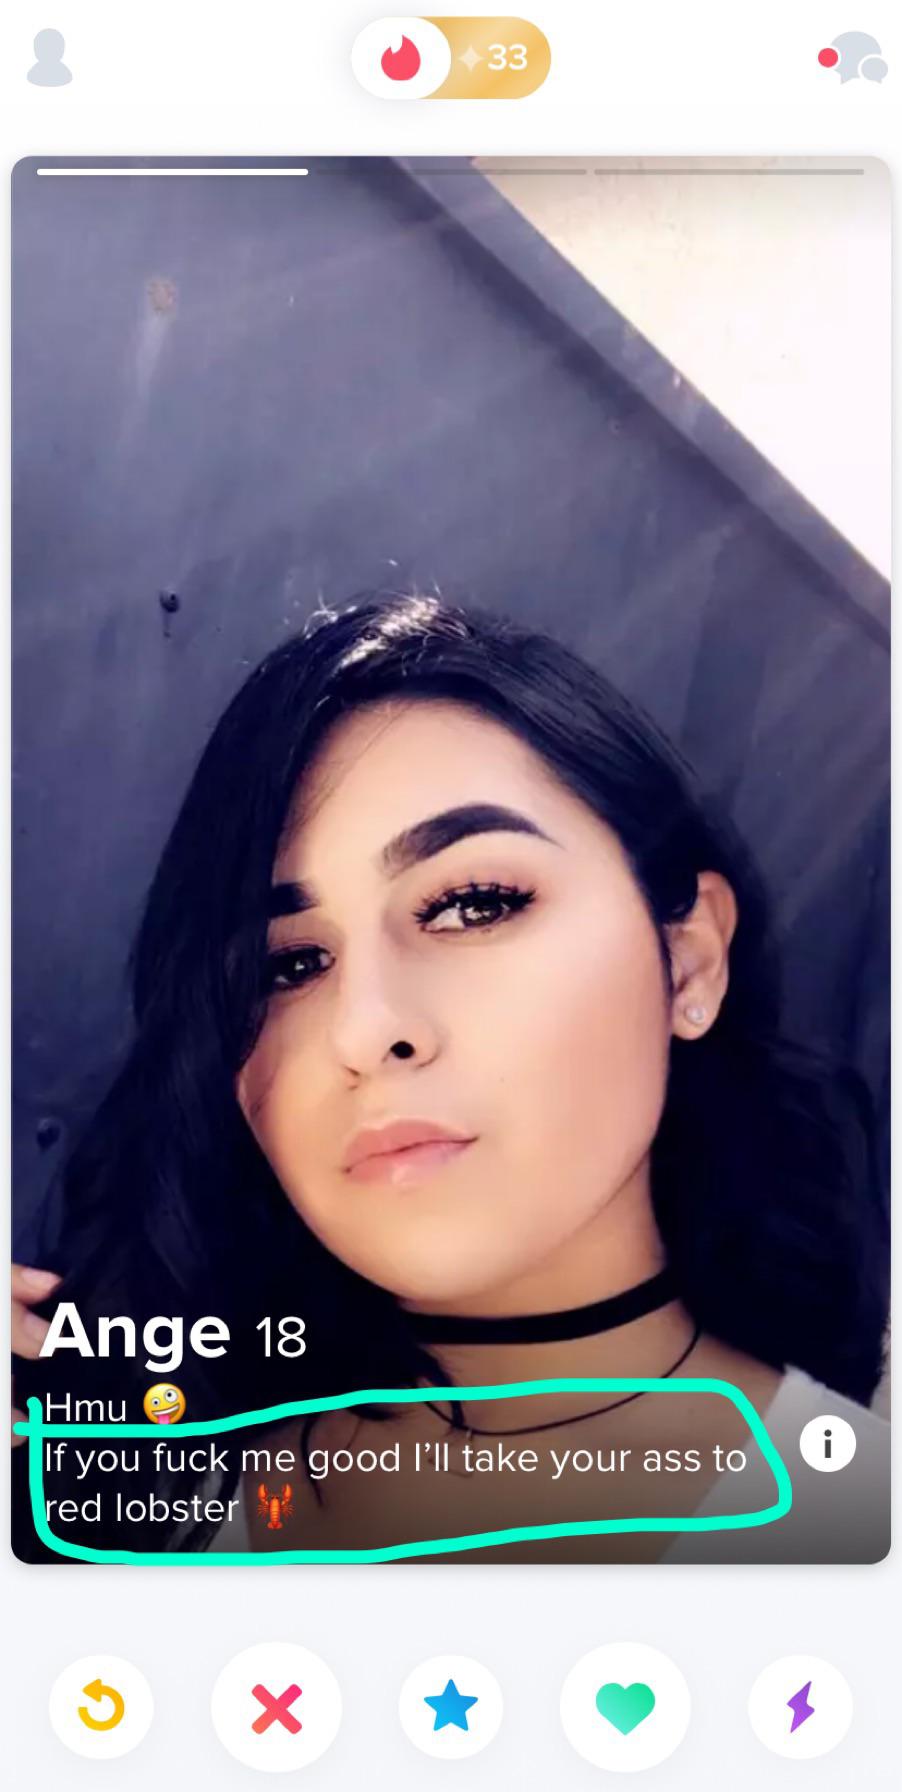 tinder wins and fails -Ange 18 Hmu If you fuck me good I'll take your ass to red lobster